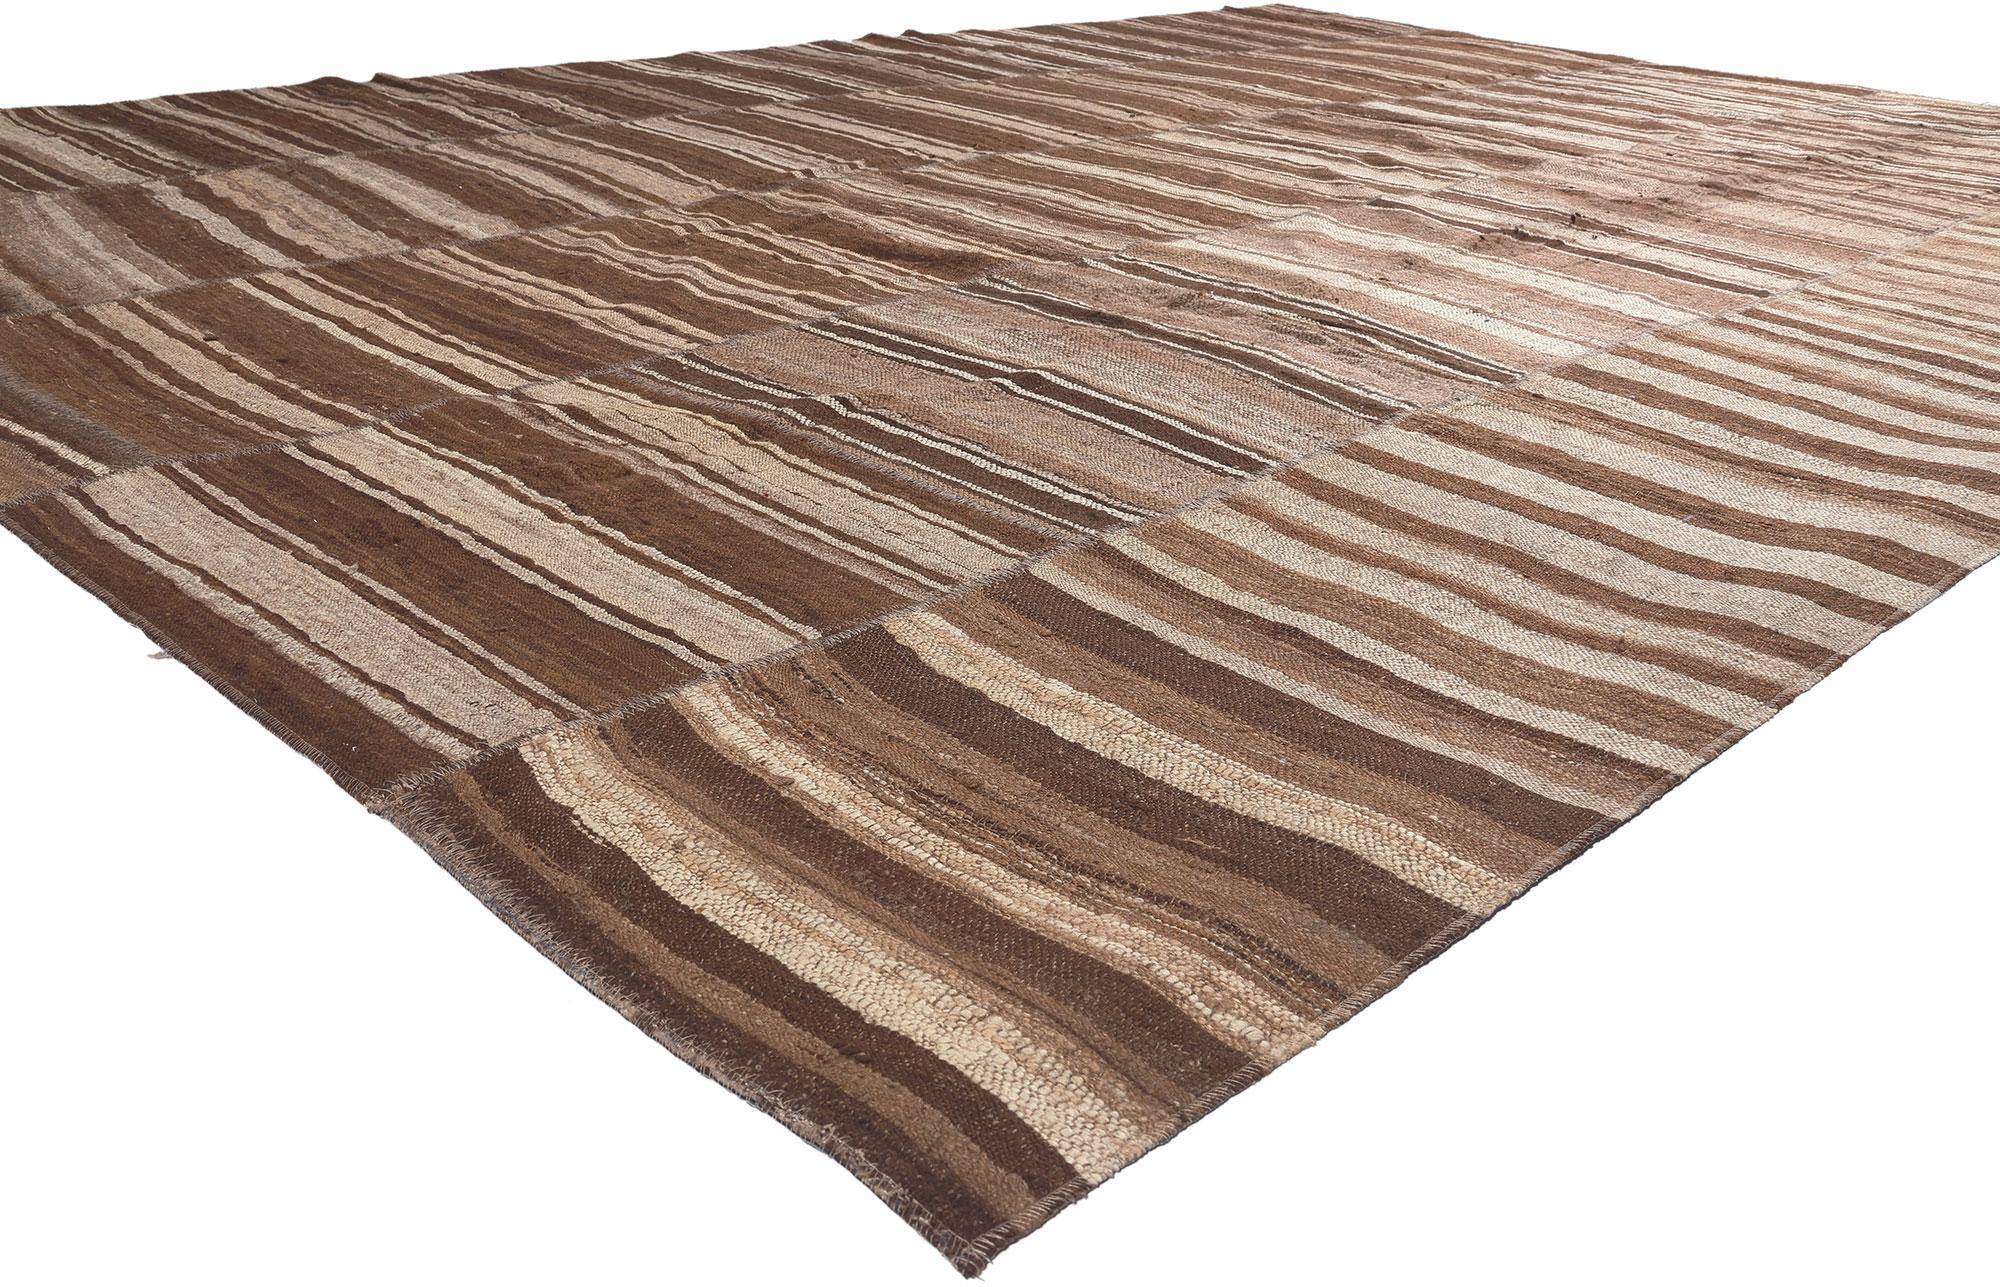 60632 Brown Vintage Turkish Striped Kilim Rug, 10'01 x 14'02. In the crafting of this vintage Turkish kilim rug, the essence of Wabi-Sabi seamlessly intertwines with sustainable design, giving rise to a masterpiece that blends rustic elegance with a